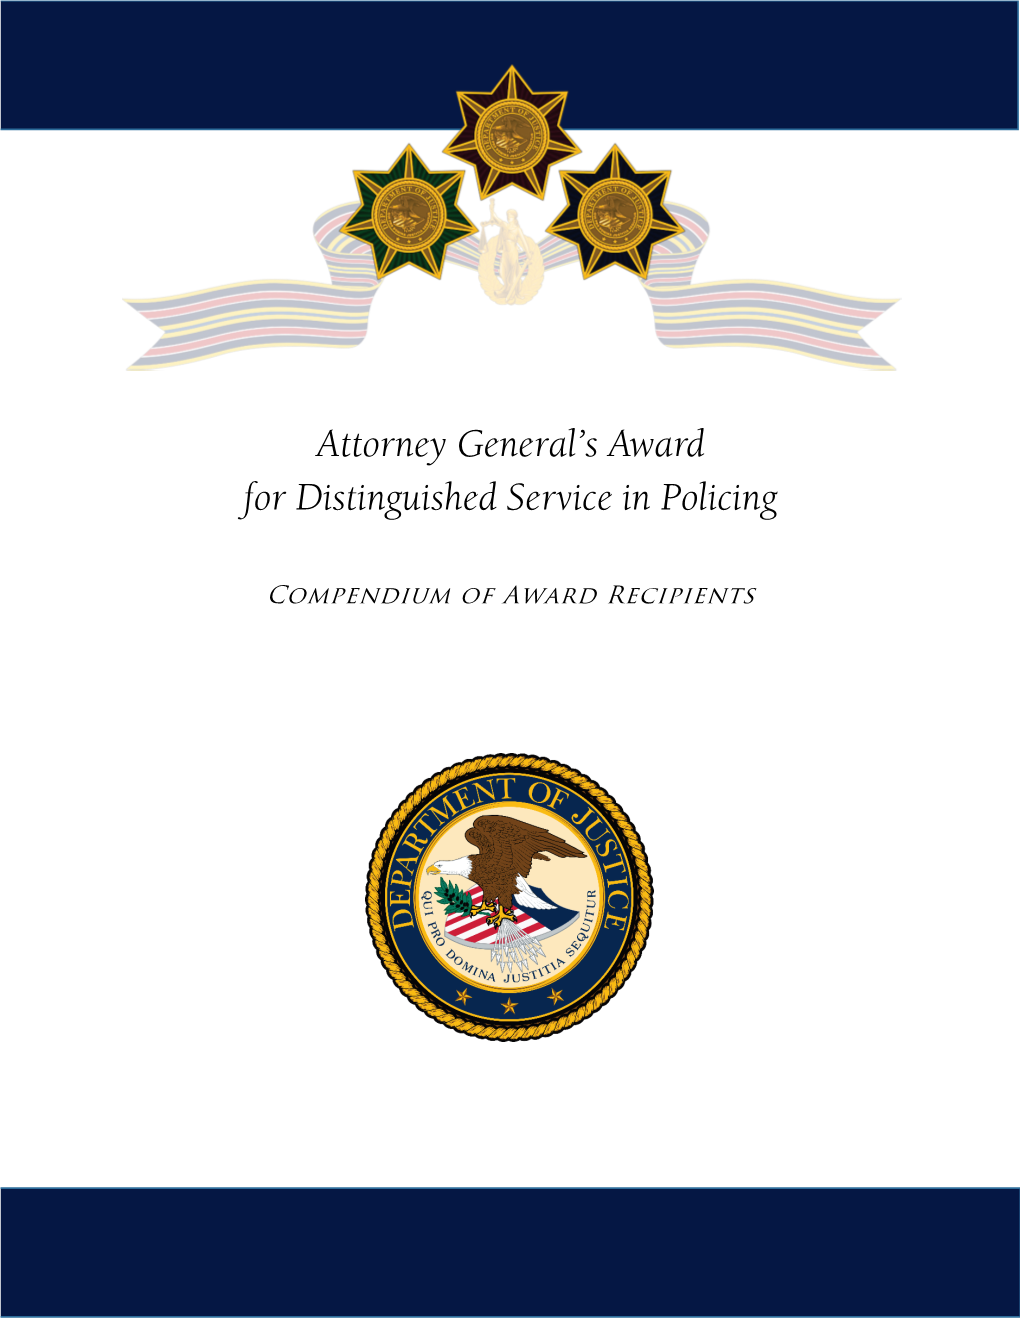 Attorney General's Award for Distinguished Service in Policing